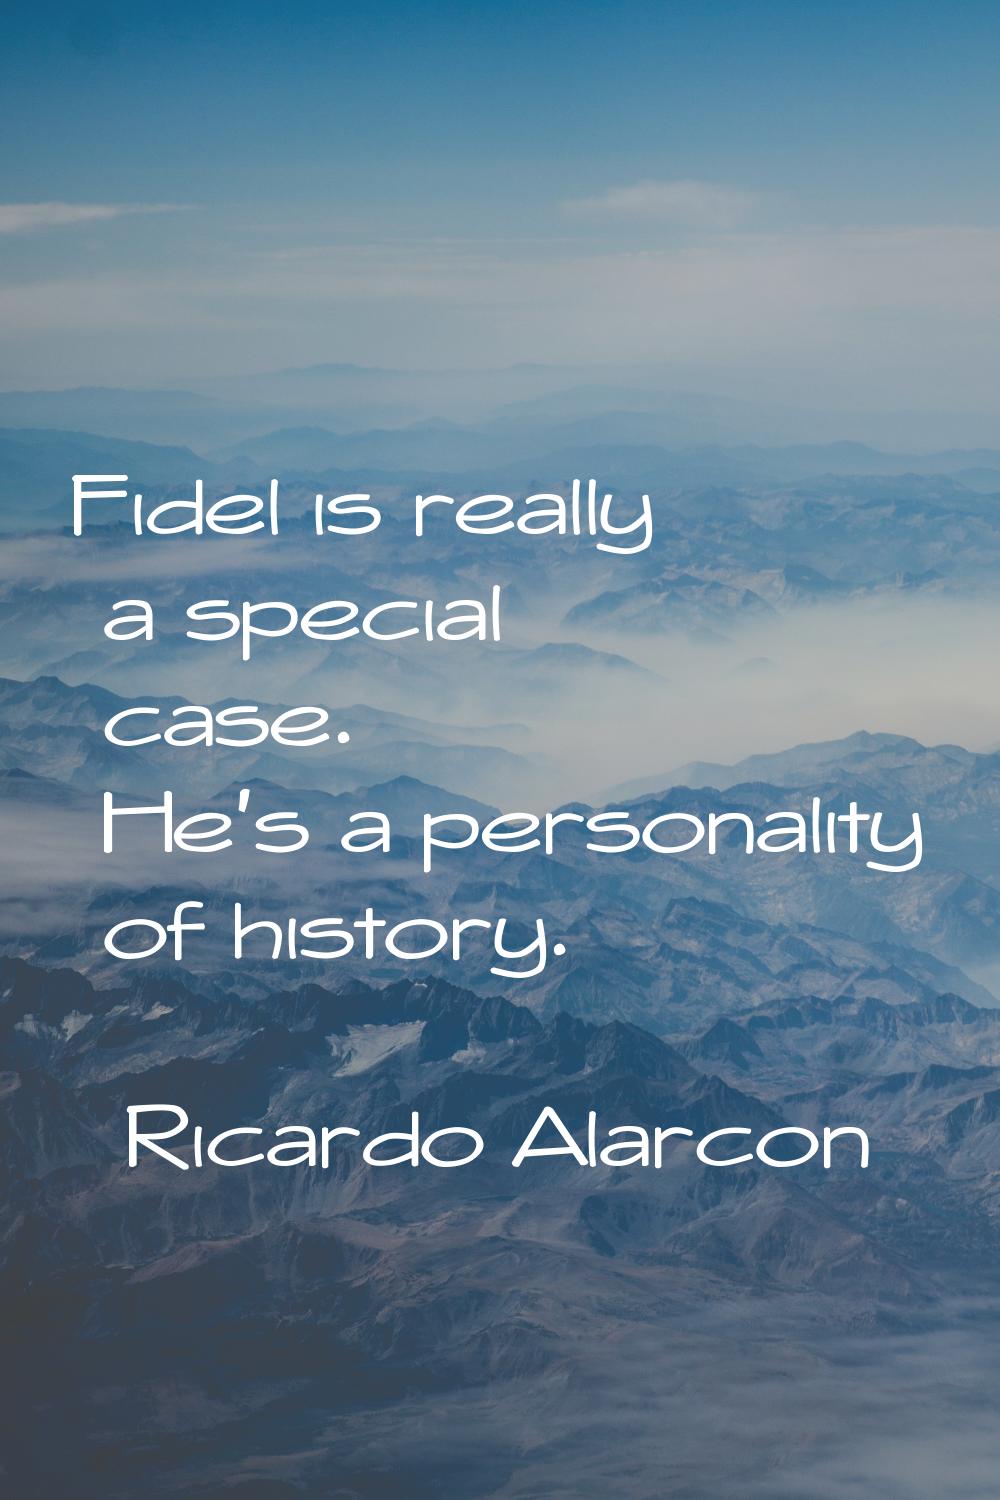 Fidel is really a special case. He's a personality of history.